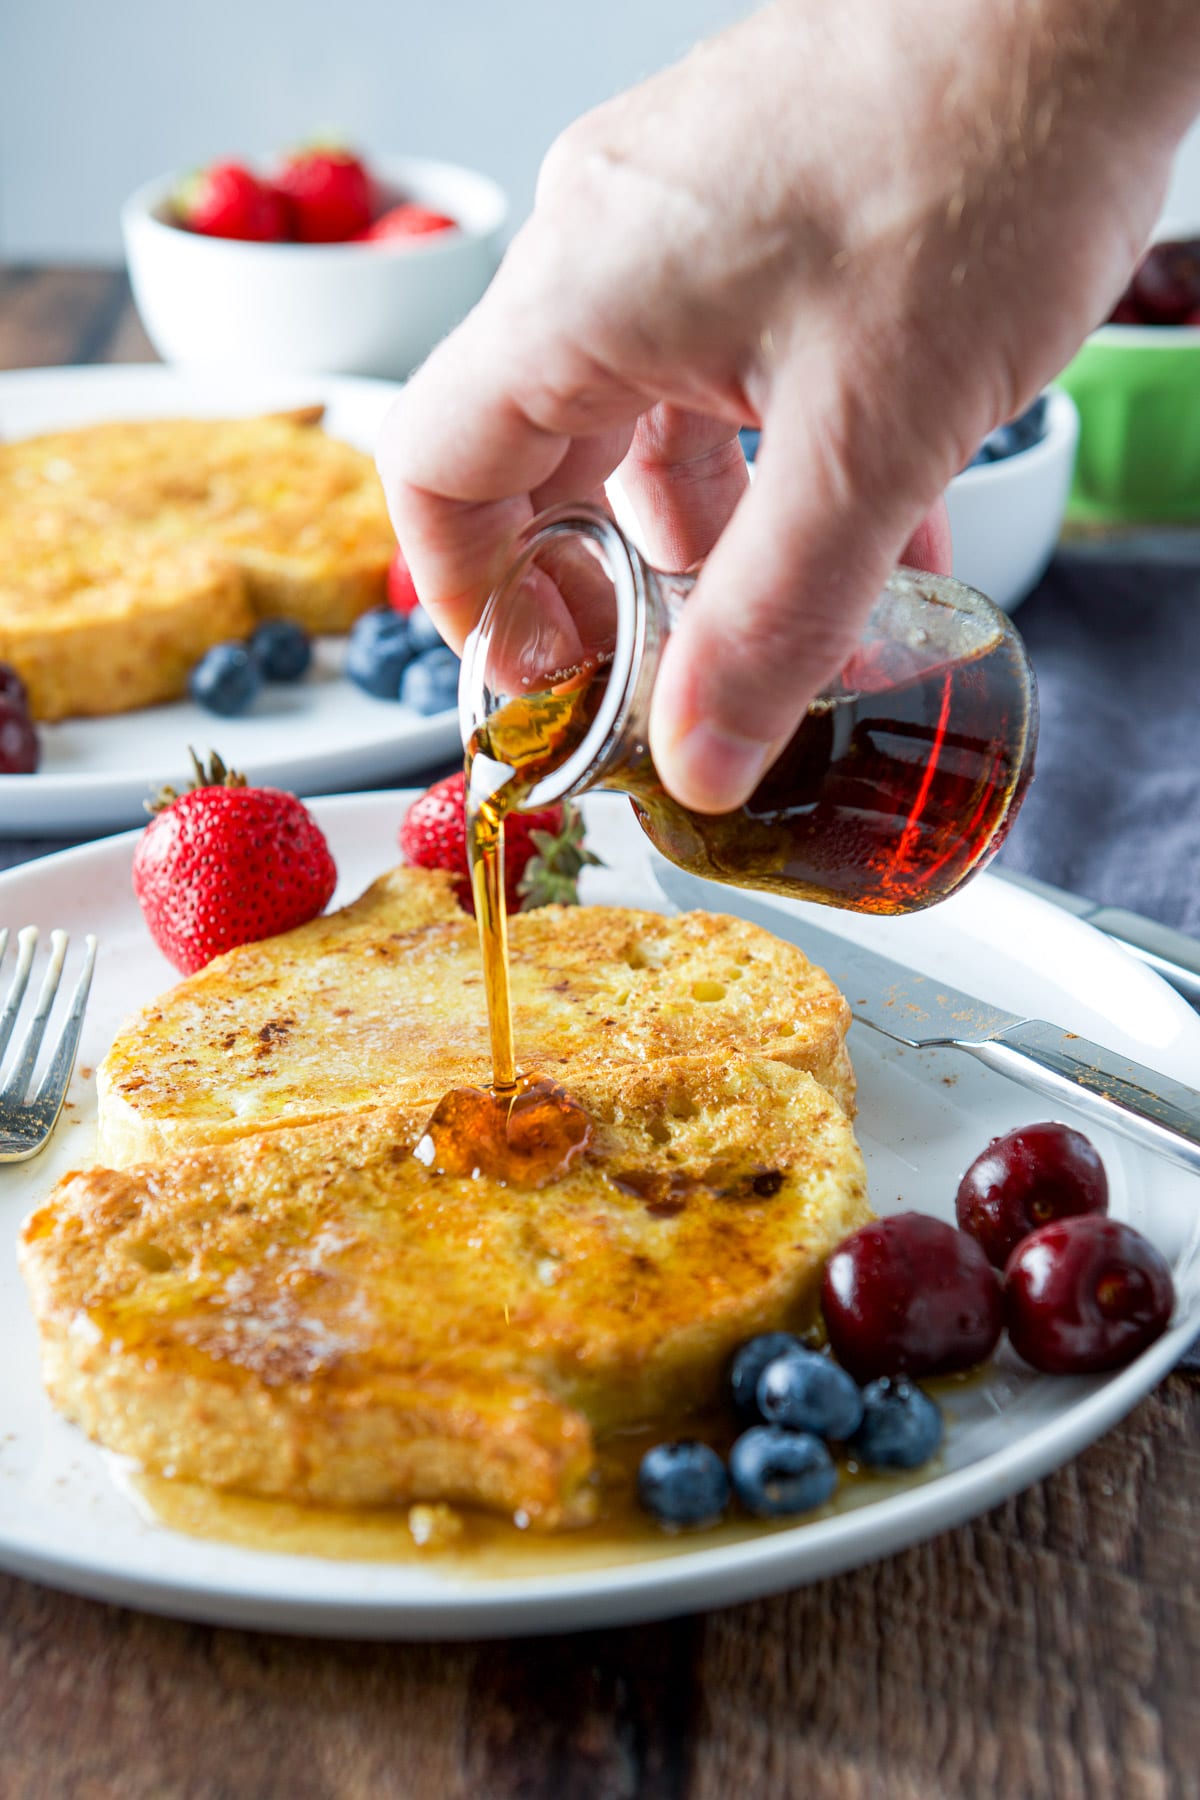 A male hand pouring syrup on some French toast